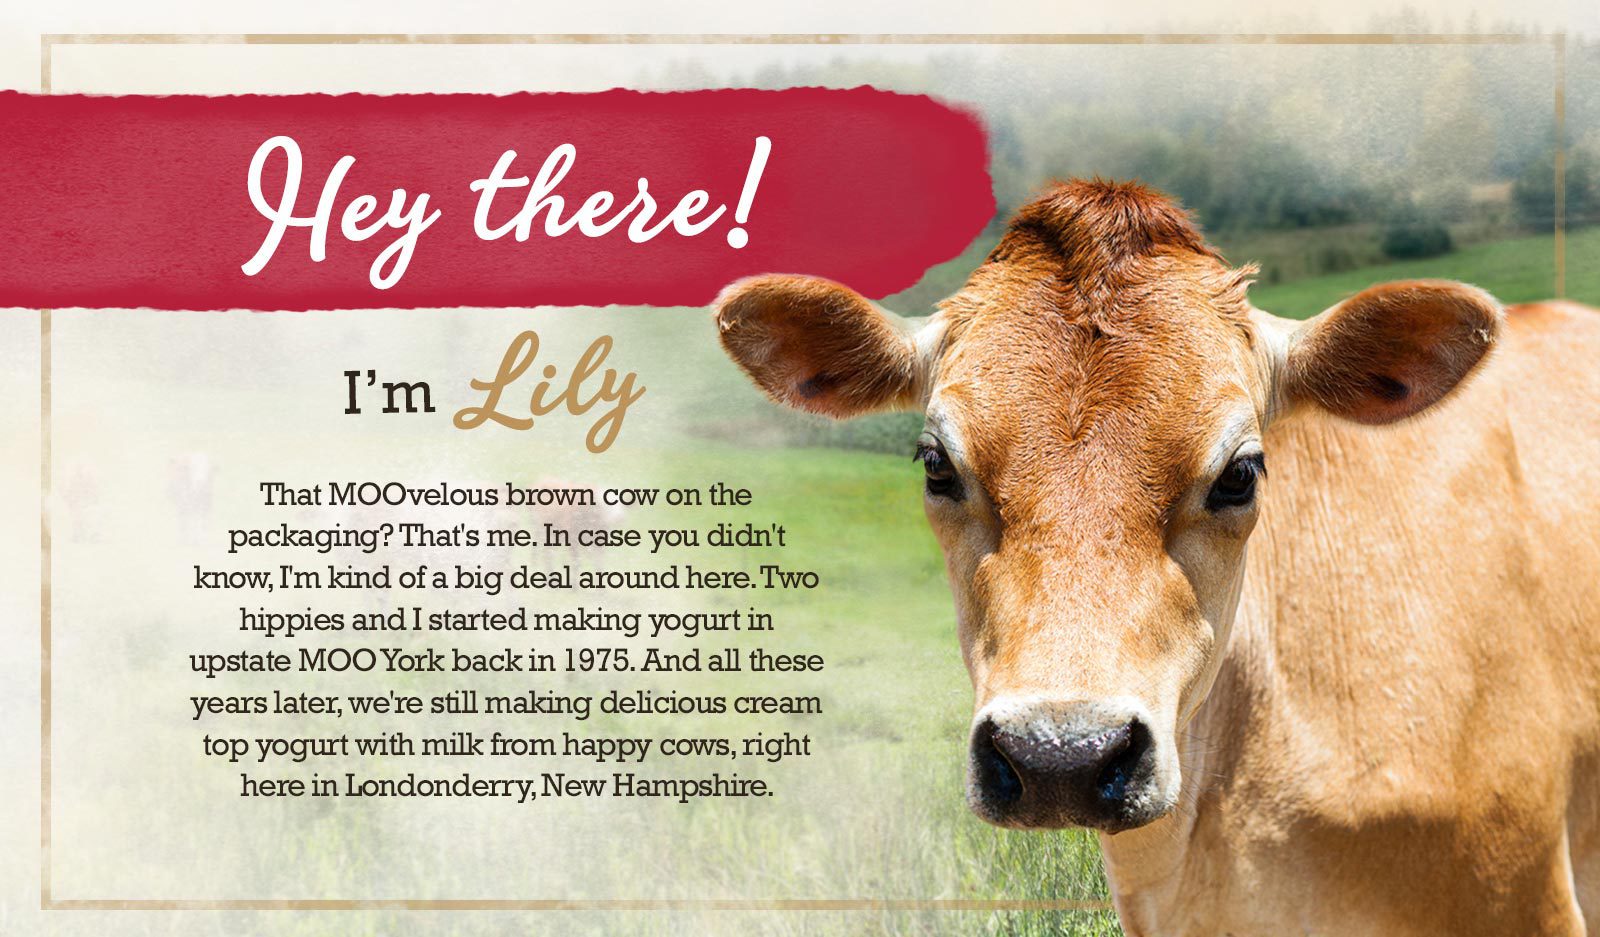 Image of Lily the cow